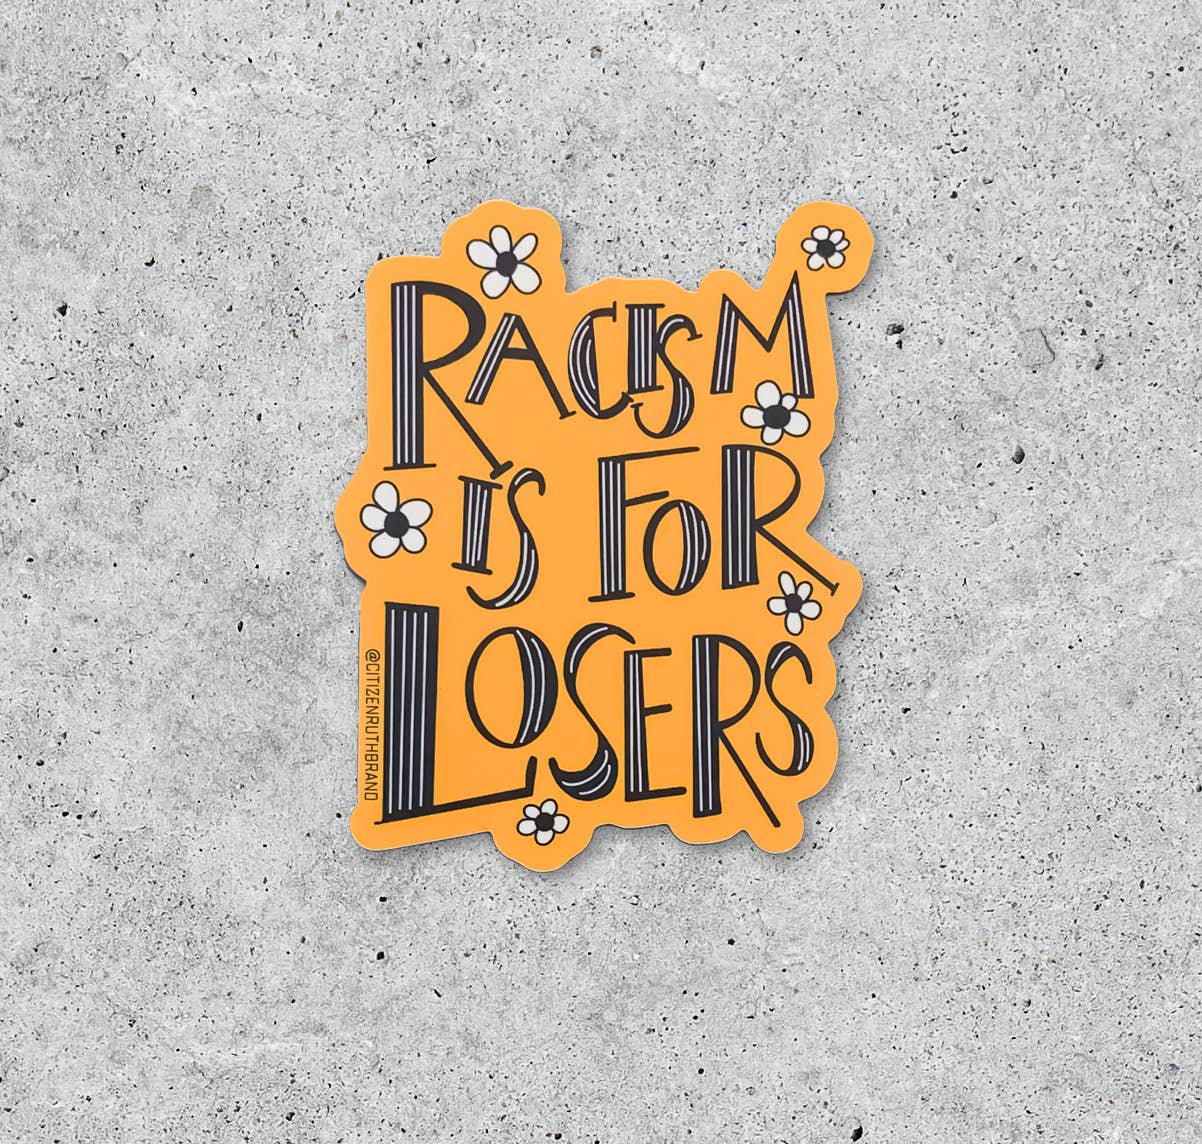 Citizen Ruth - Racism Is For Losers Sticker